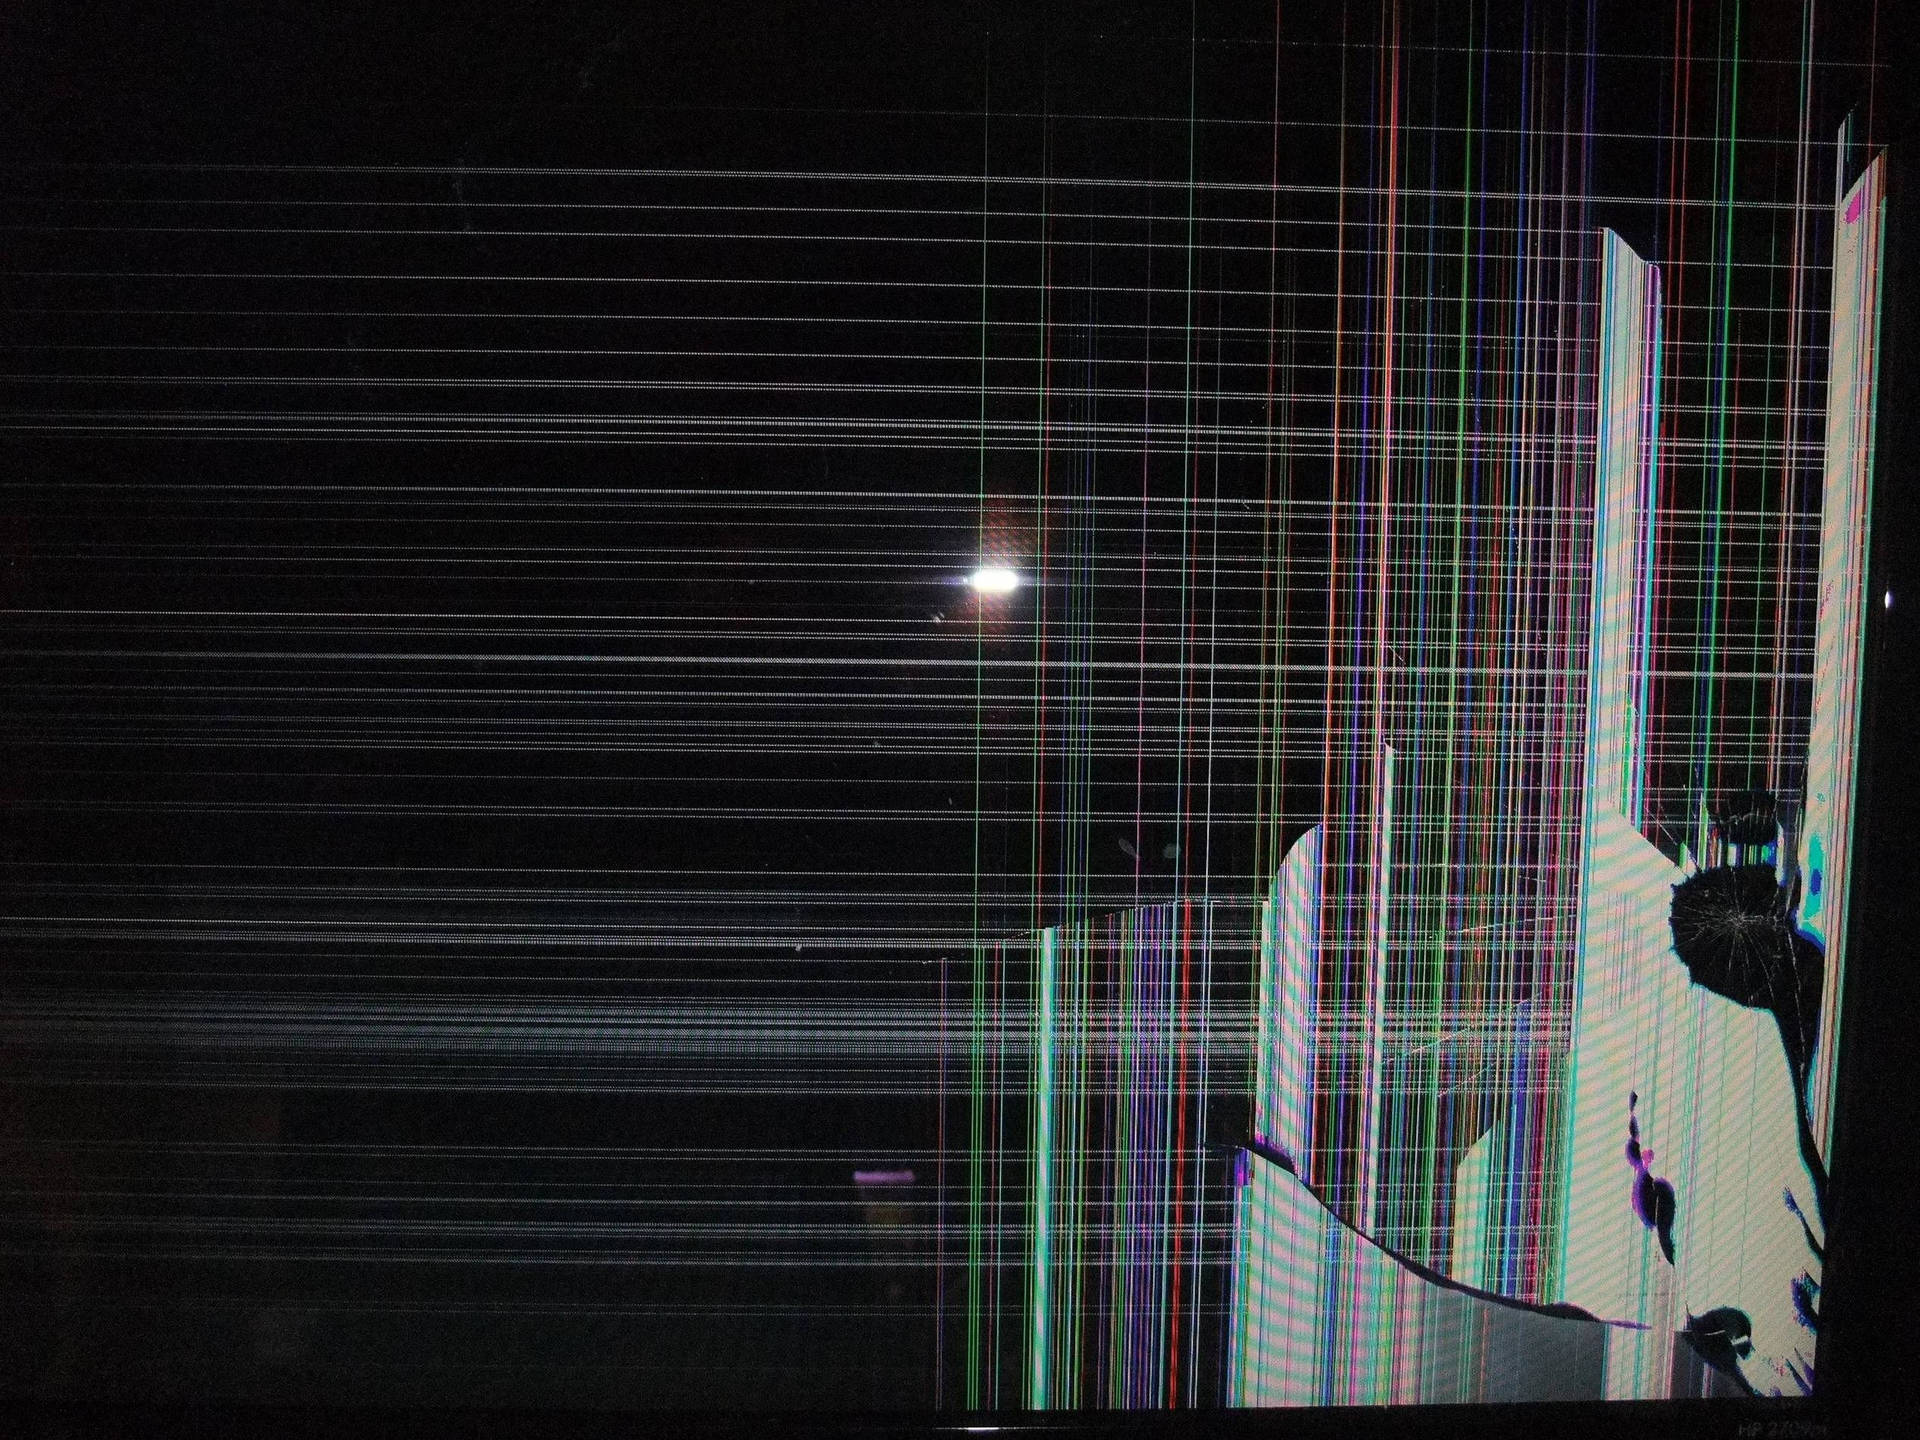 Damaged 4k Television Displaying Colorful Lines